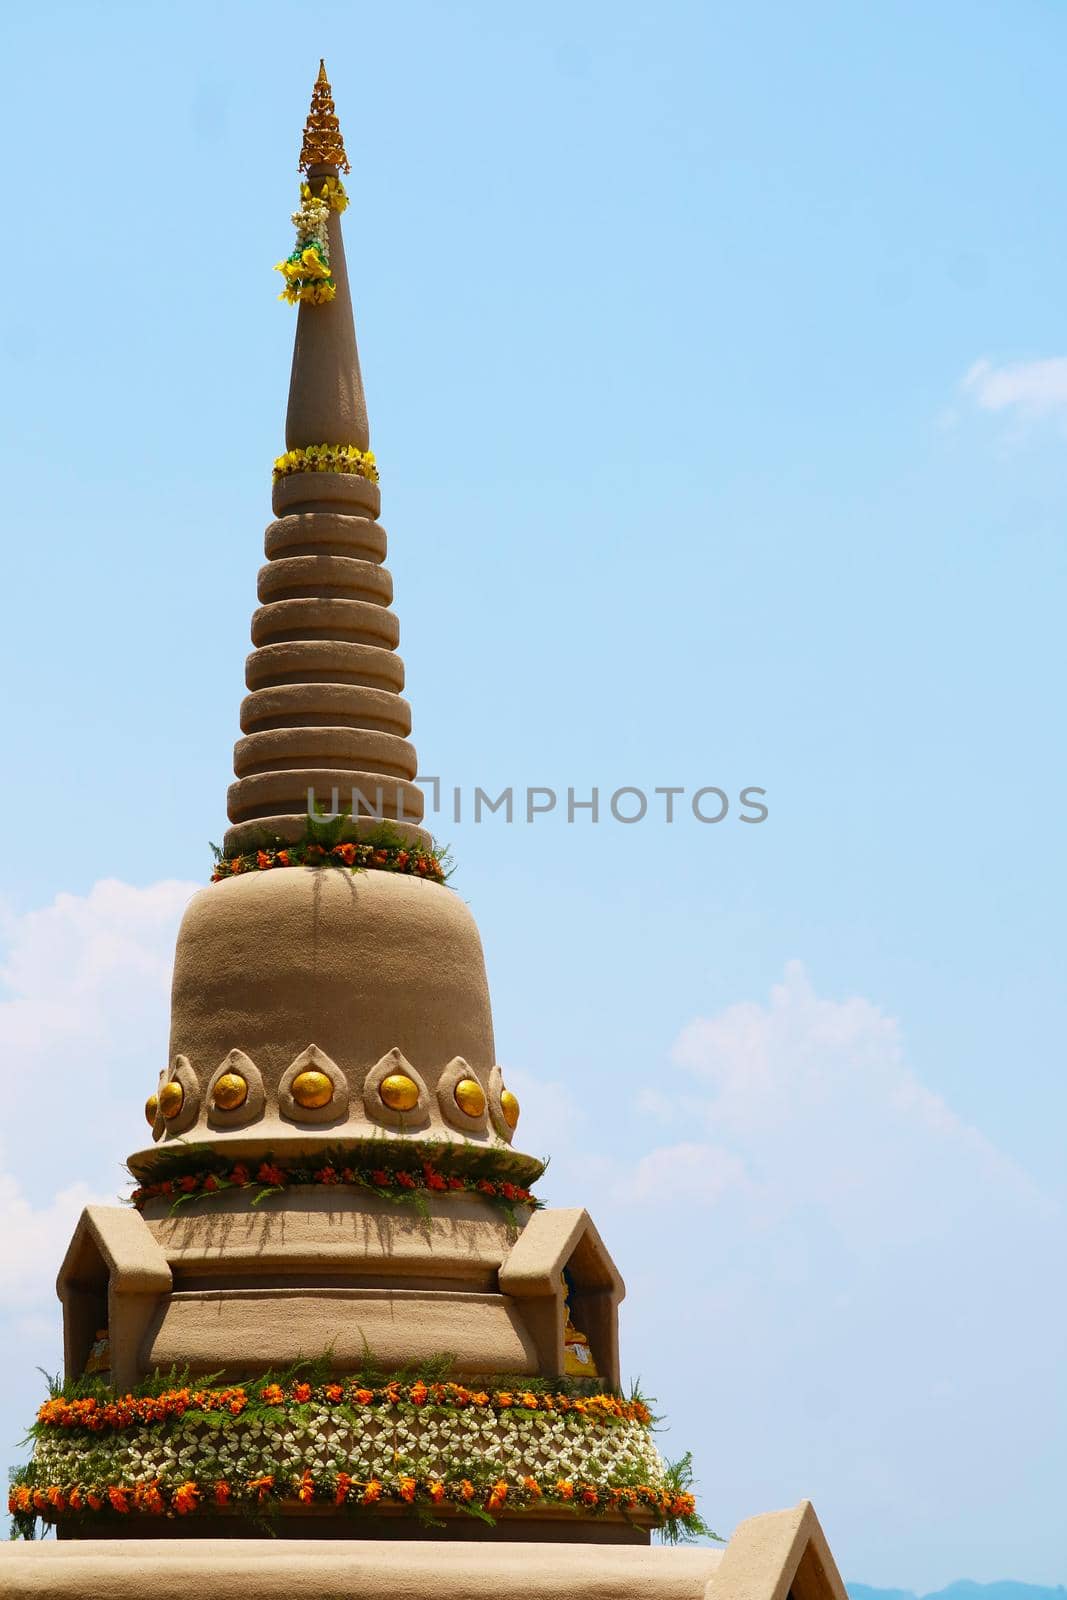 top of sand pagoda was carefully built, and beautifully decorated in Songkran festival